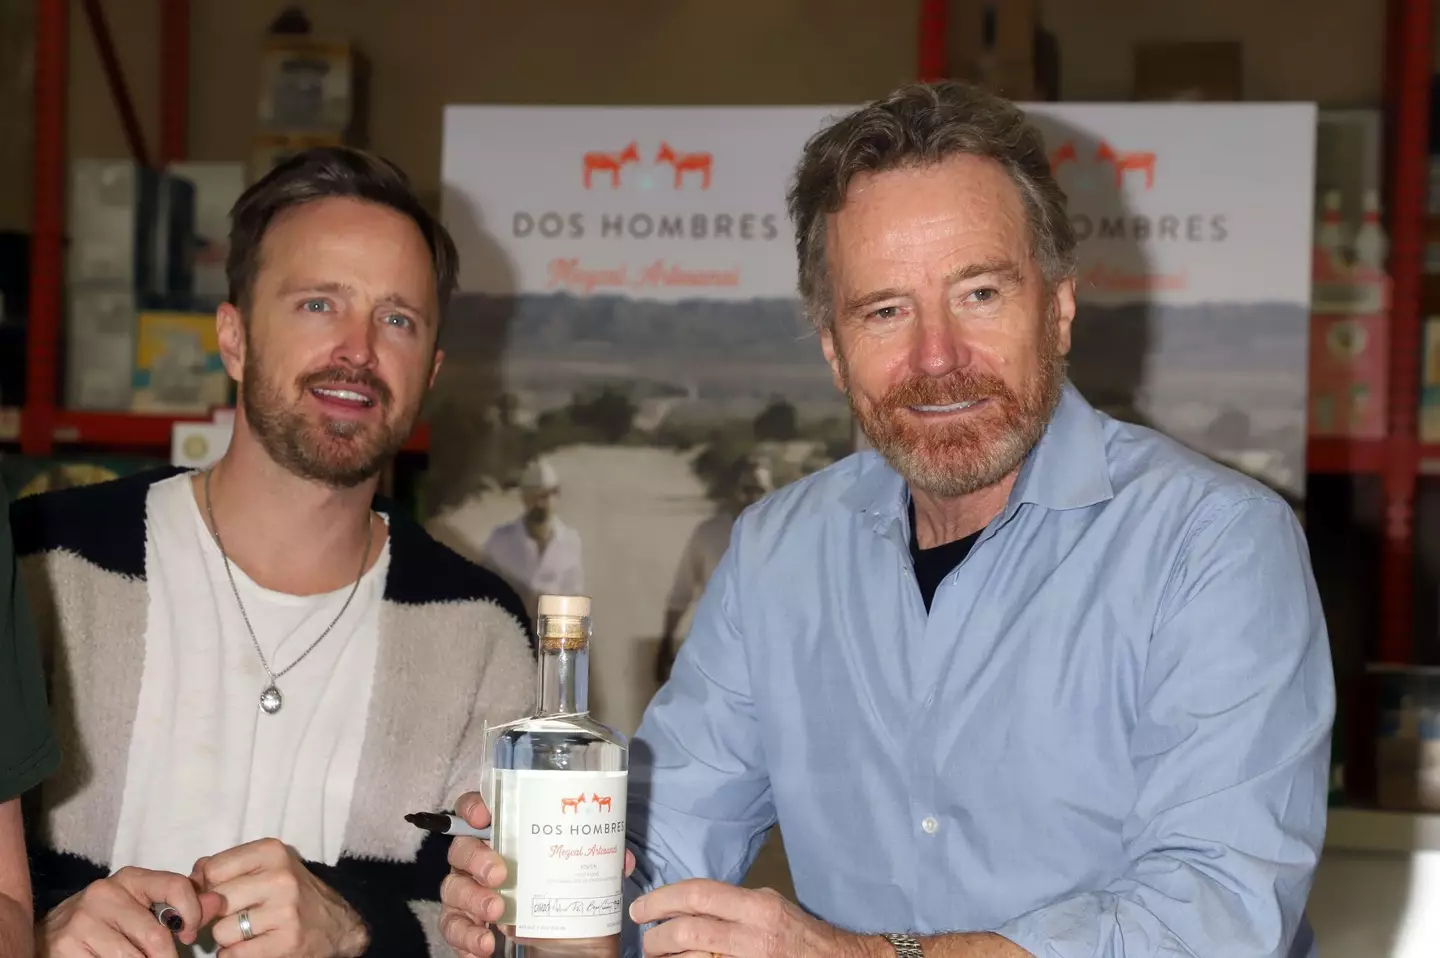 Bryan Cranston and Aaron Paul have gone into business together.